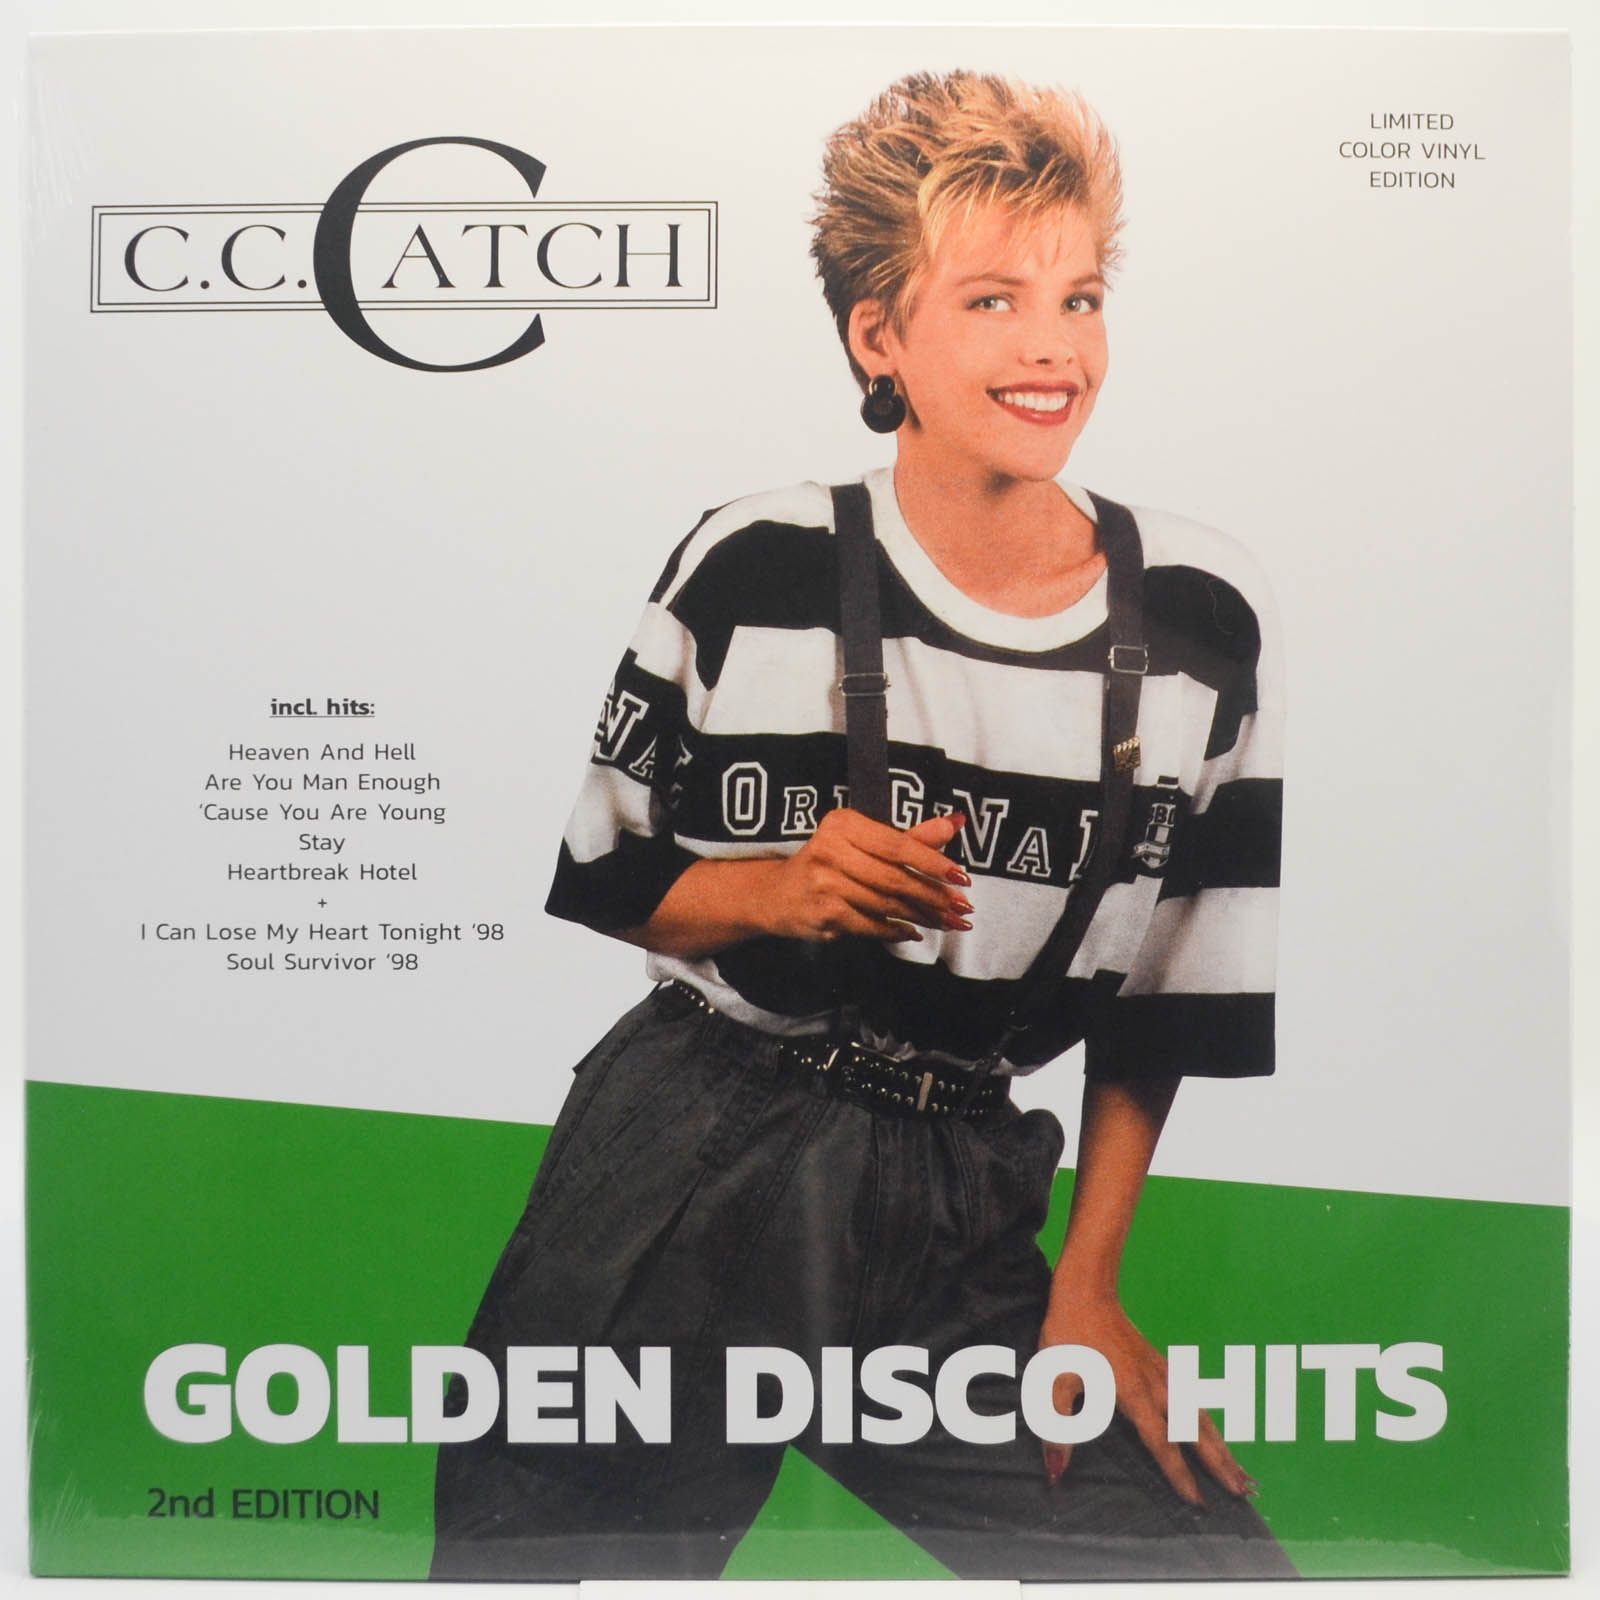 C.C. Catch — Golden Disco Hits (2nd Edition), 2020